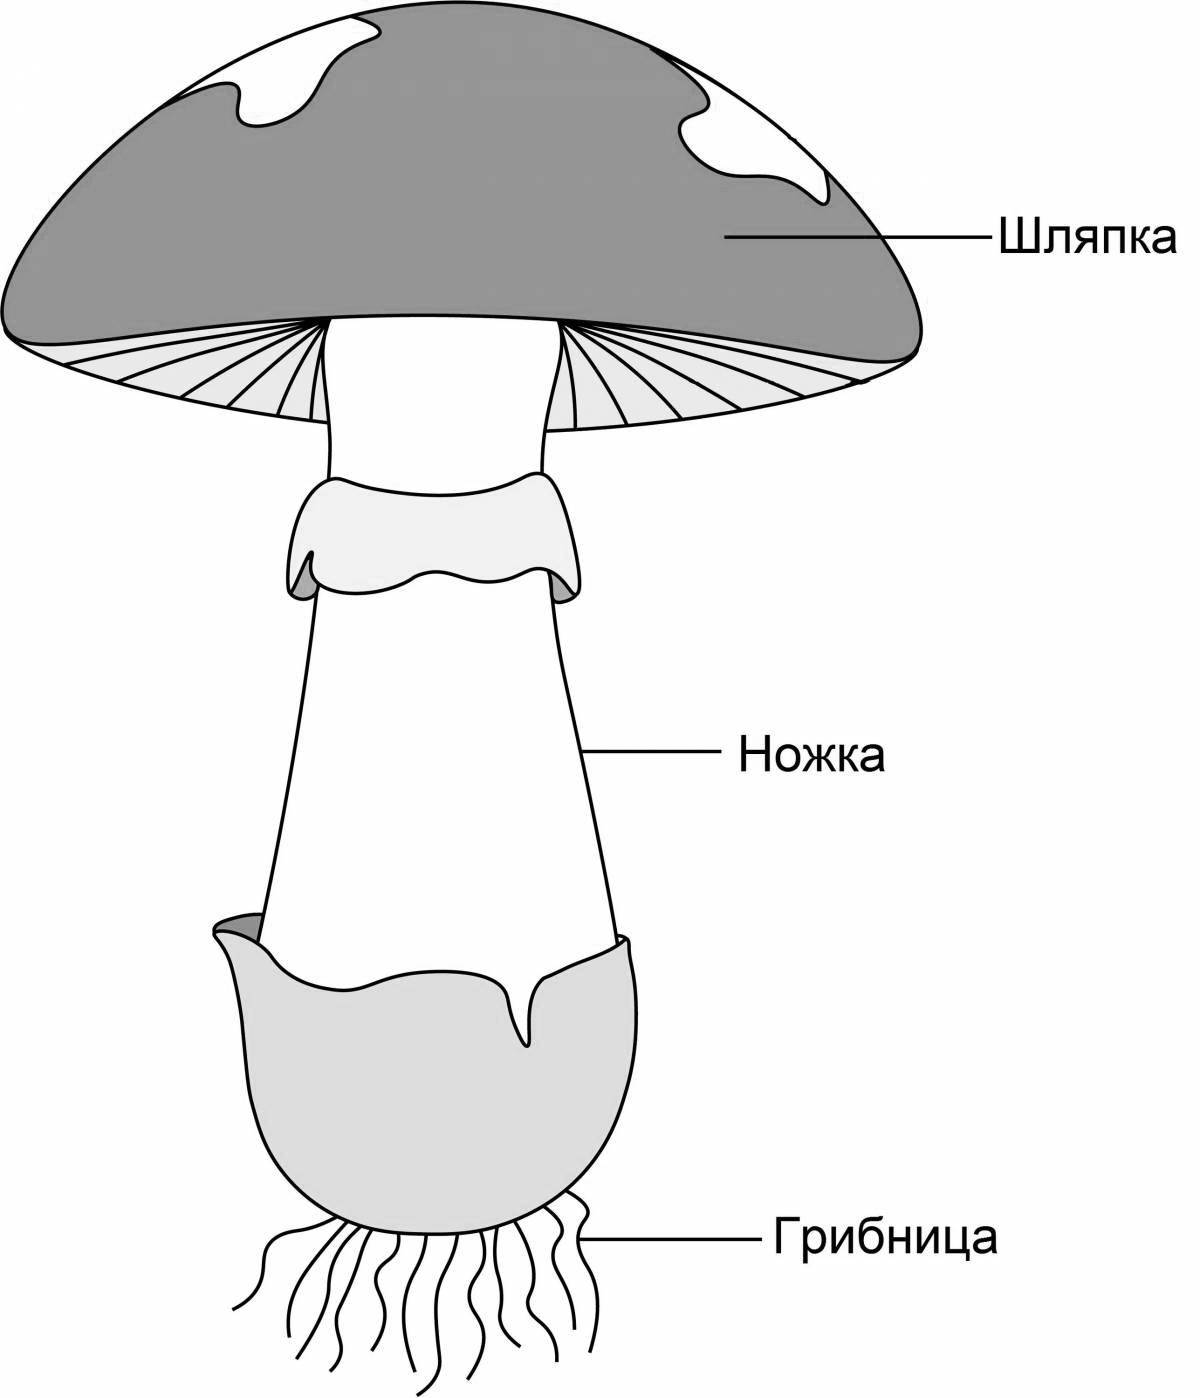 Coloring page with tempting mushroom structure